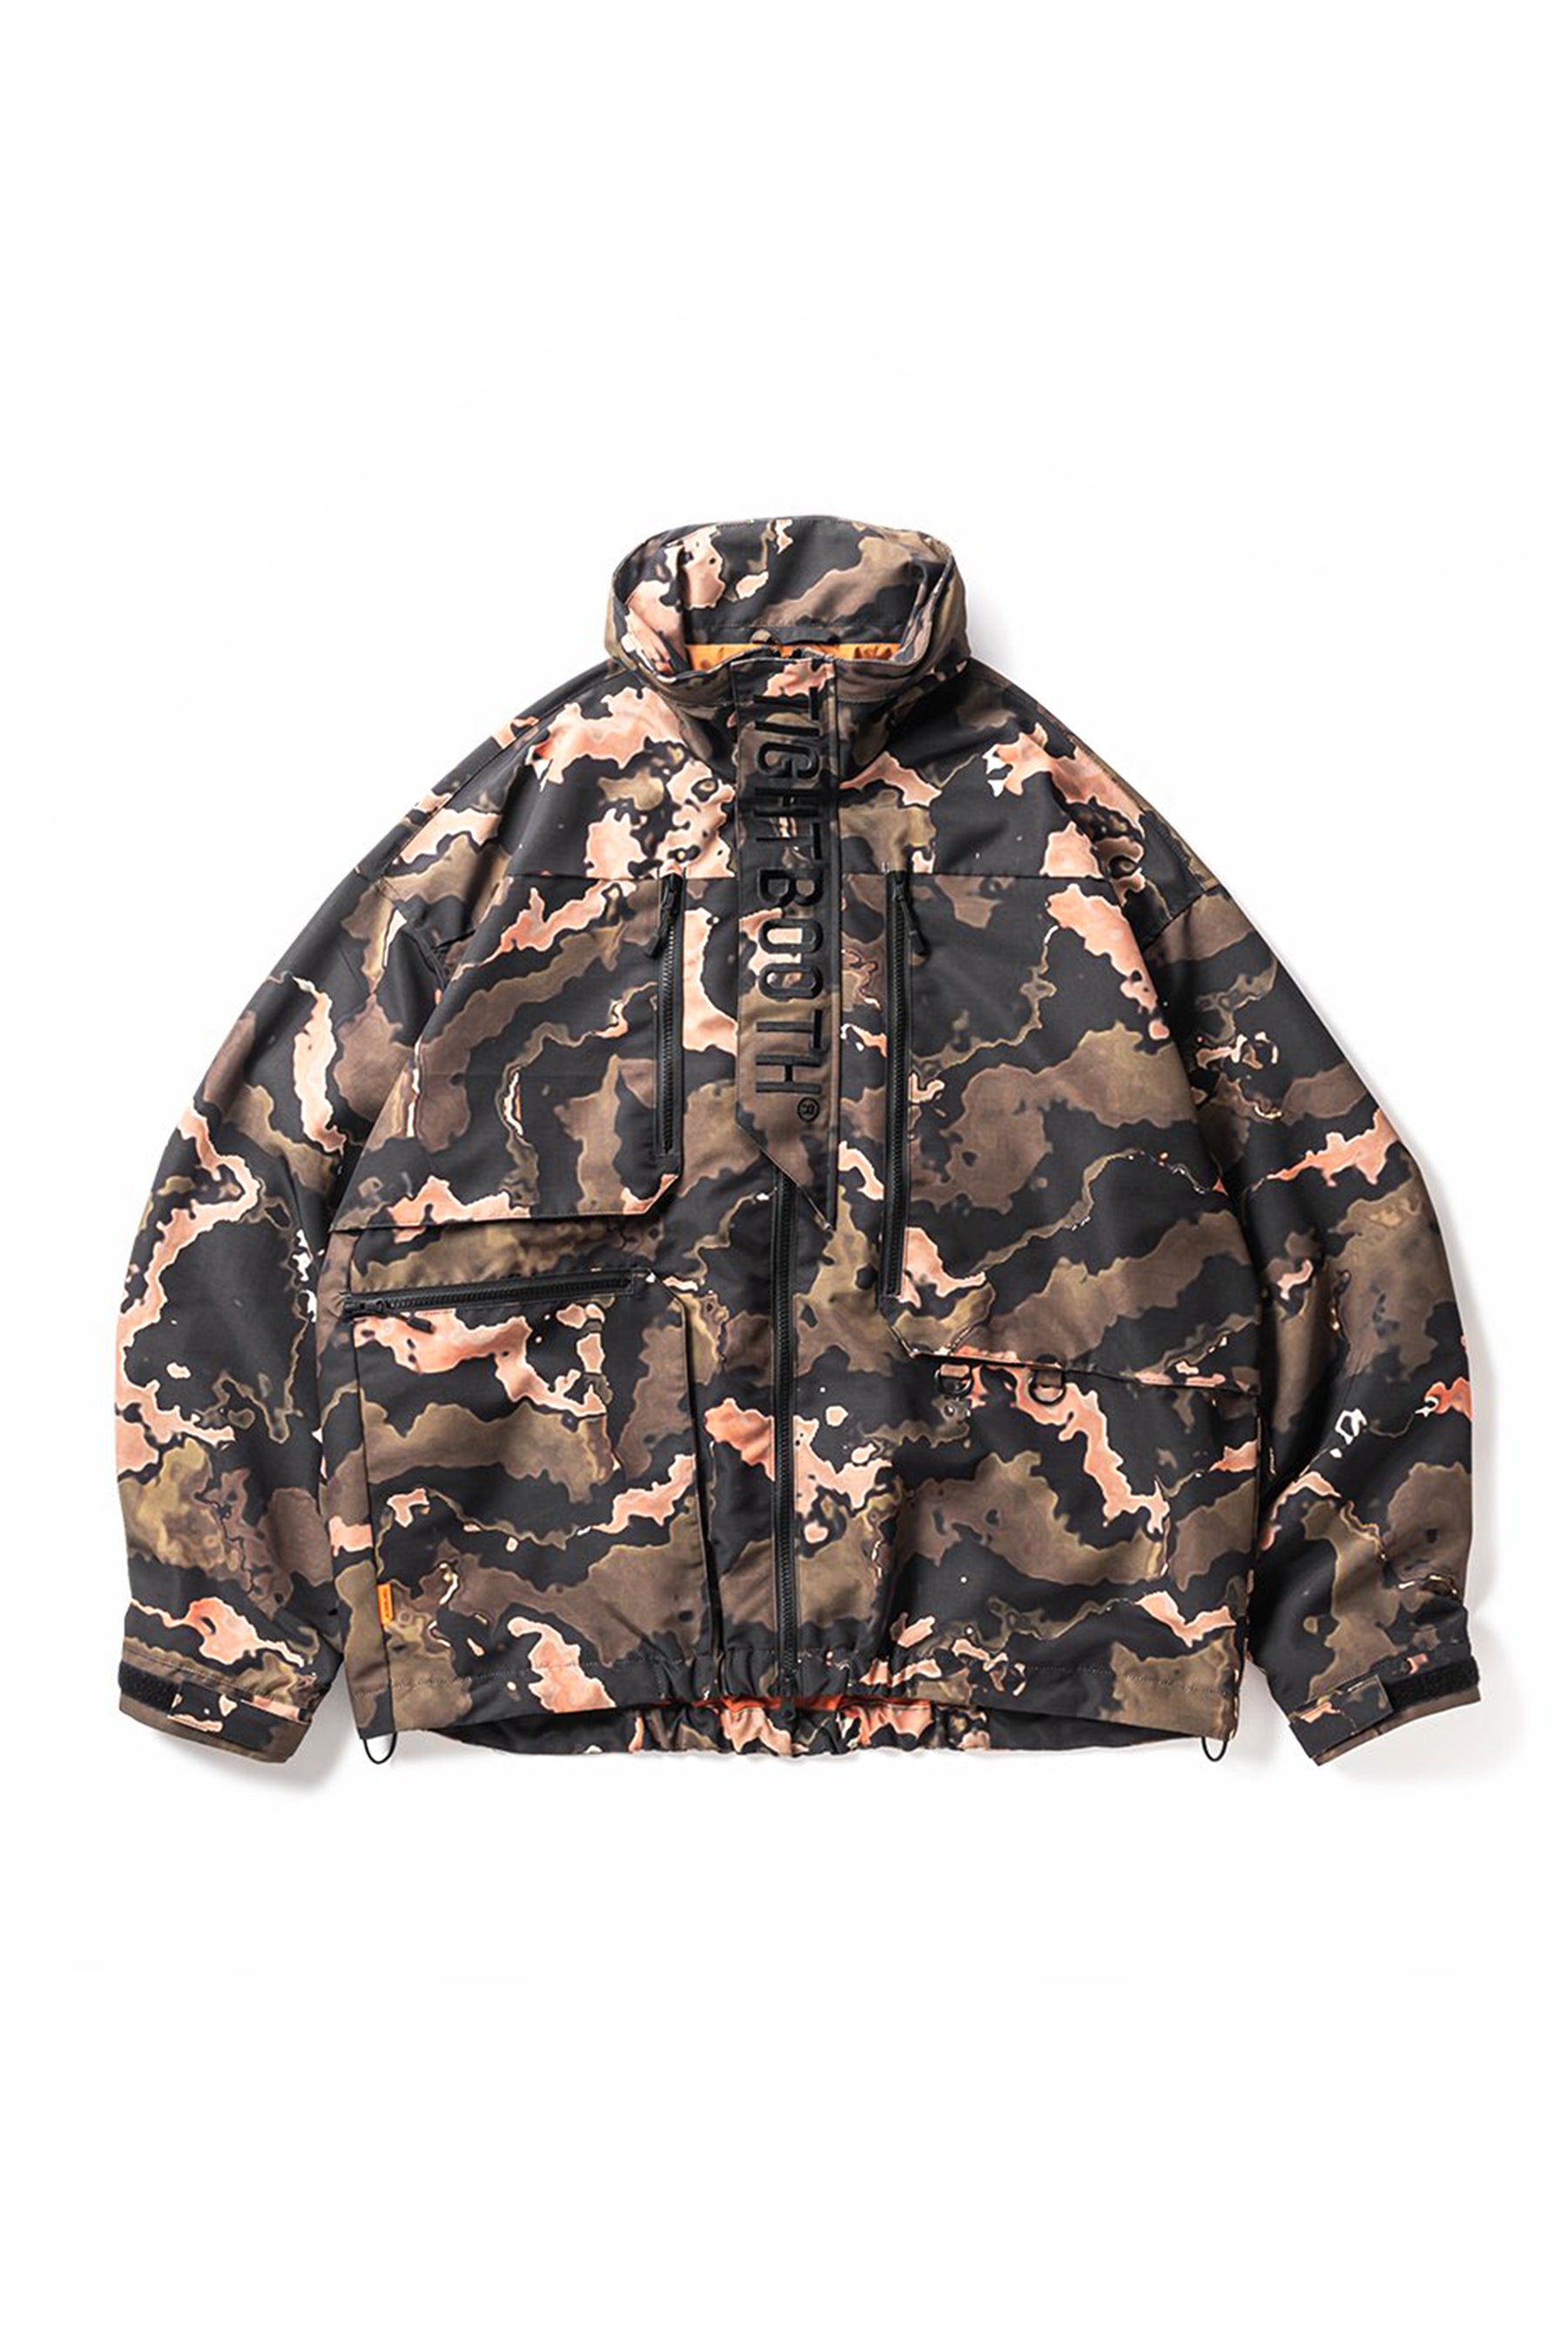 TIGHTBOOTH タイトブース SS24 RIPSTOP TACTICAL JKT / ORG CAMO - NUBIAN